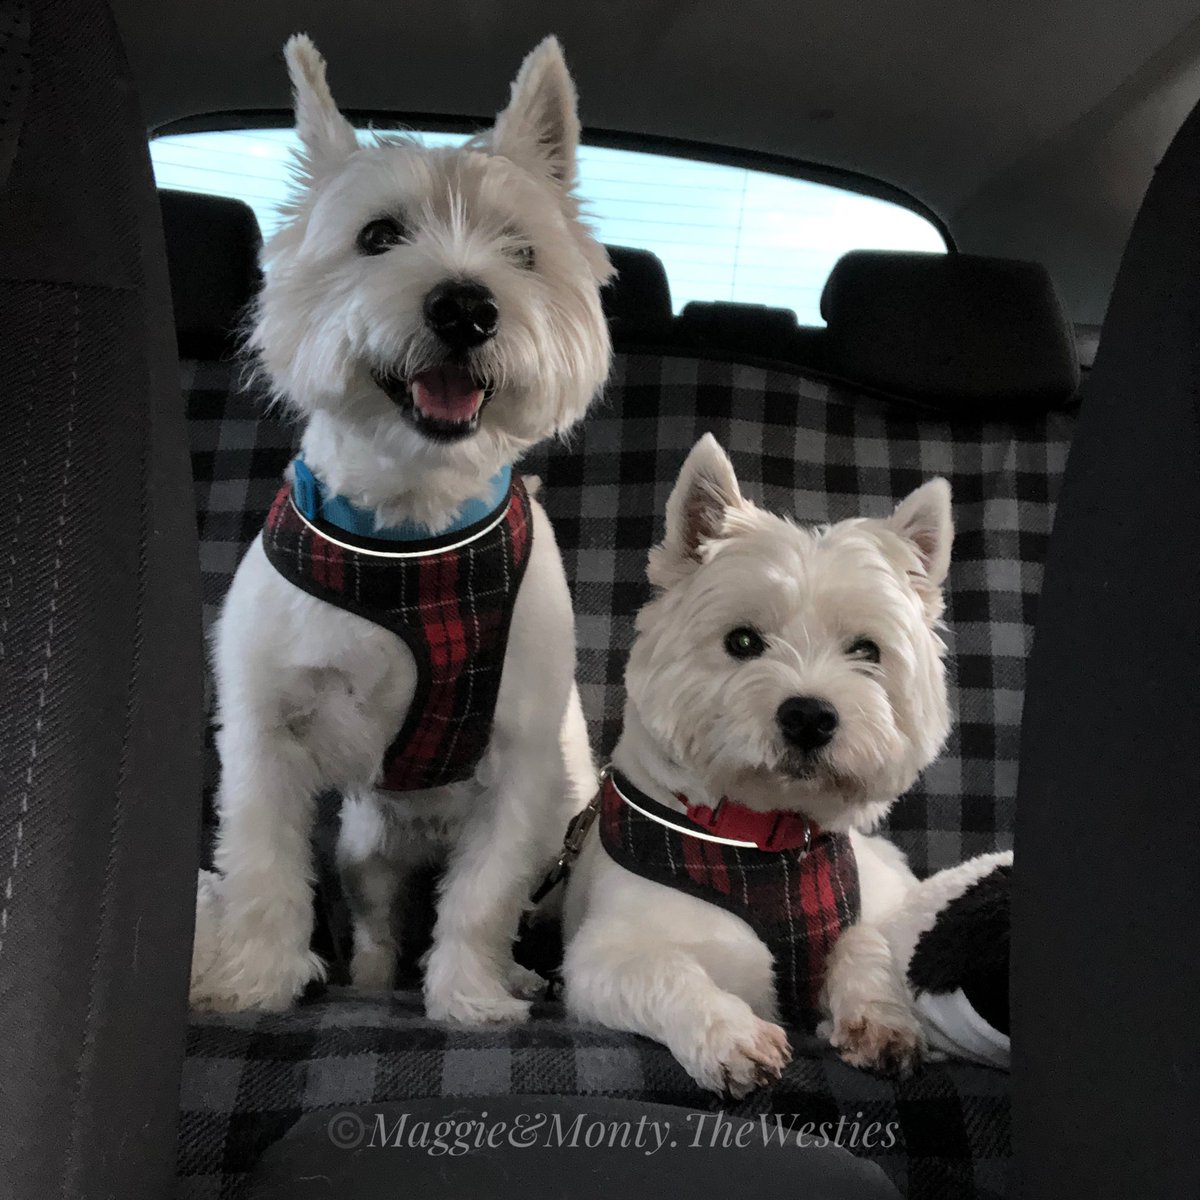 Dad’s getting dinner while we wait in the car with Mum!
.
Chinese takeaway…..Booo we won’t get any!

#maggiethewestie #montythewestie #maggieandmontythewesties  #westie #westies #westhighlandterrier #westhighlandterriers #westhighlandwhiteterrier #dogsoftwitter #westiesoftwitter